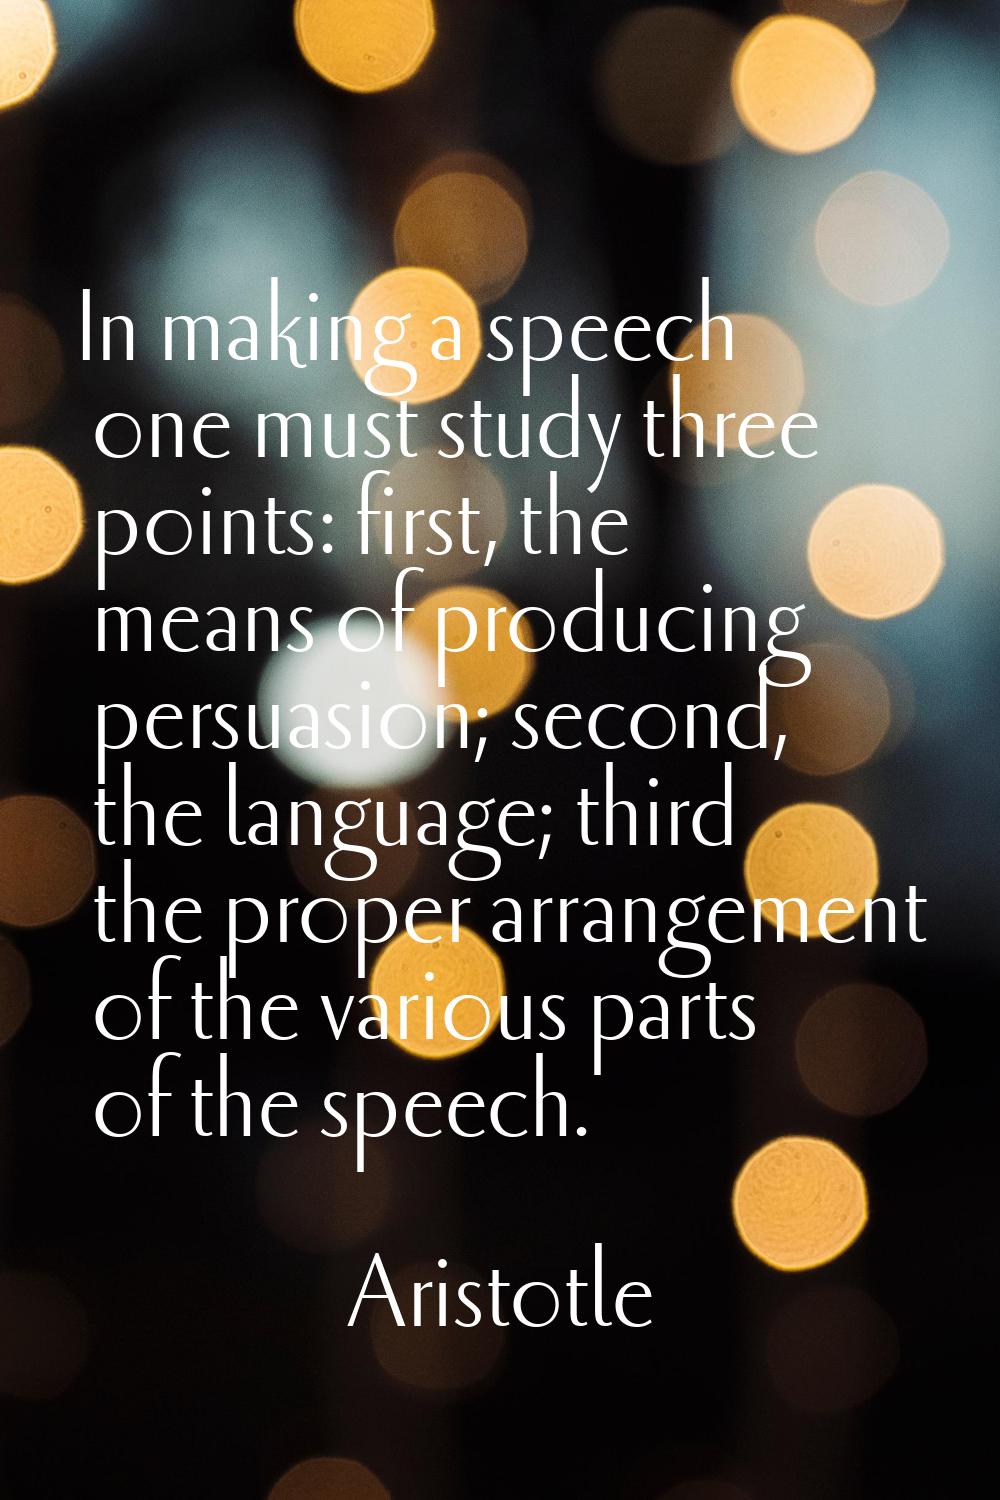 In making a speech one must study three points: first, the means of producing persuasion; second, t